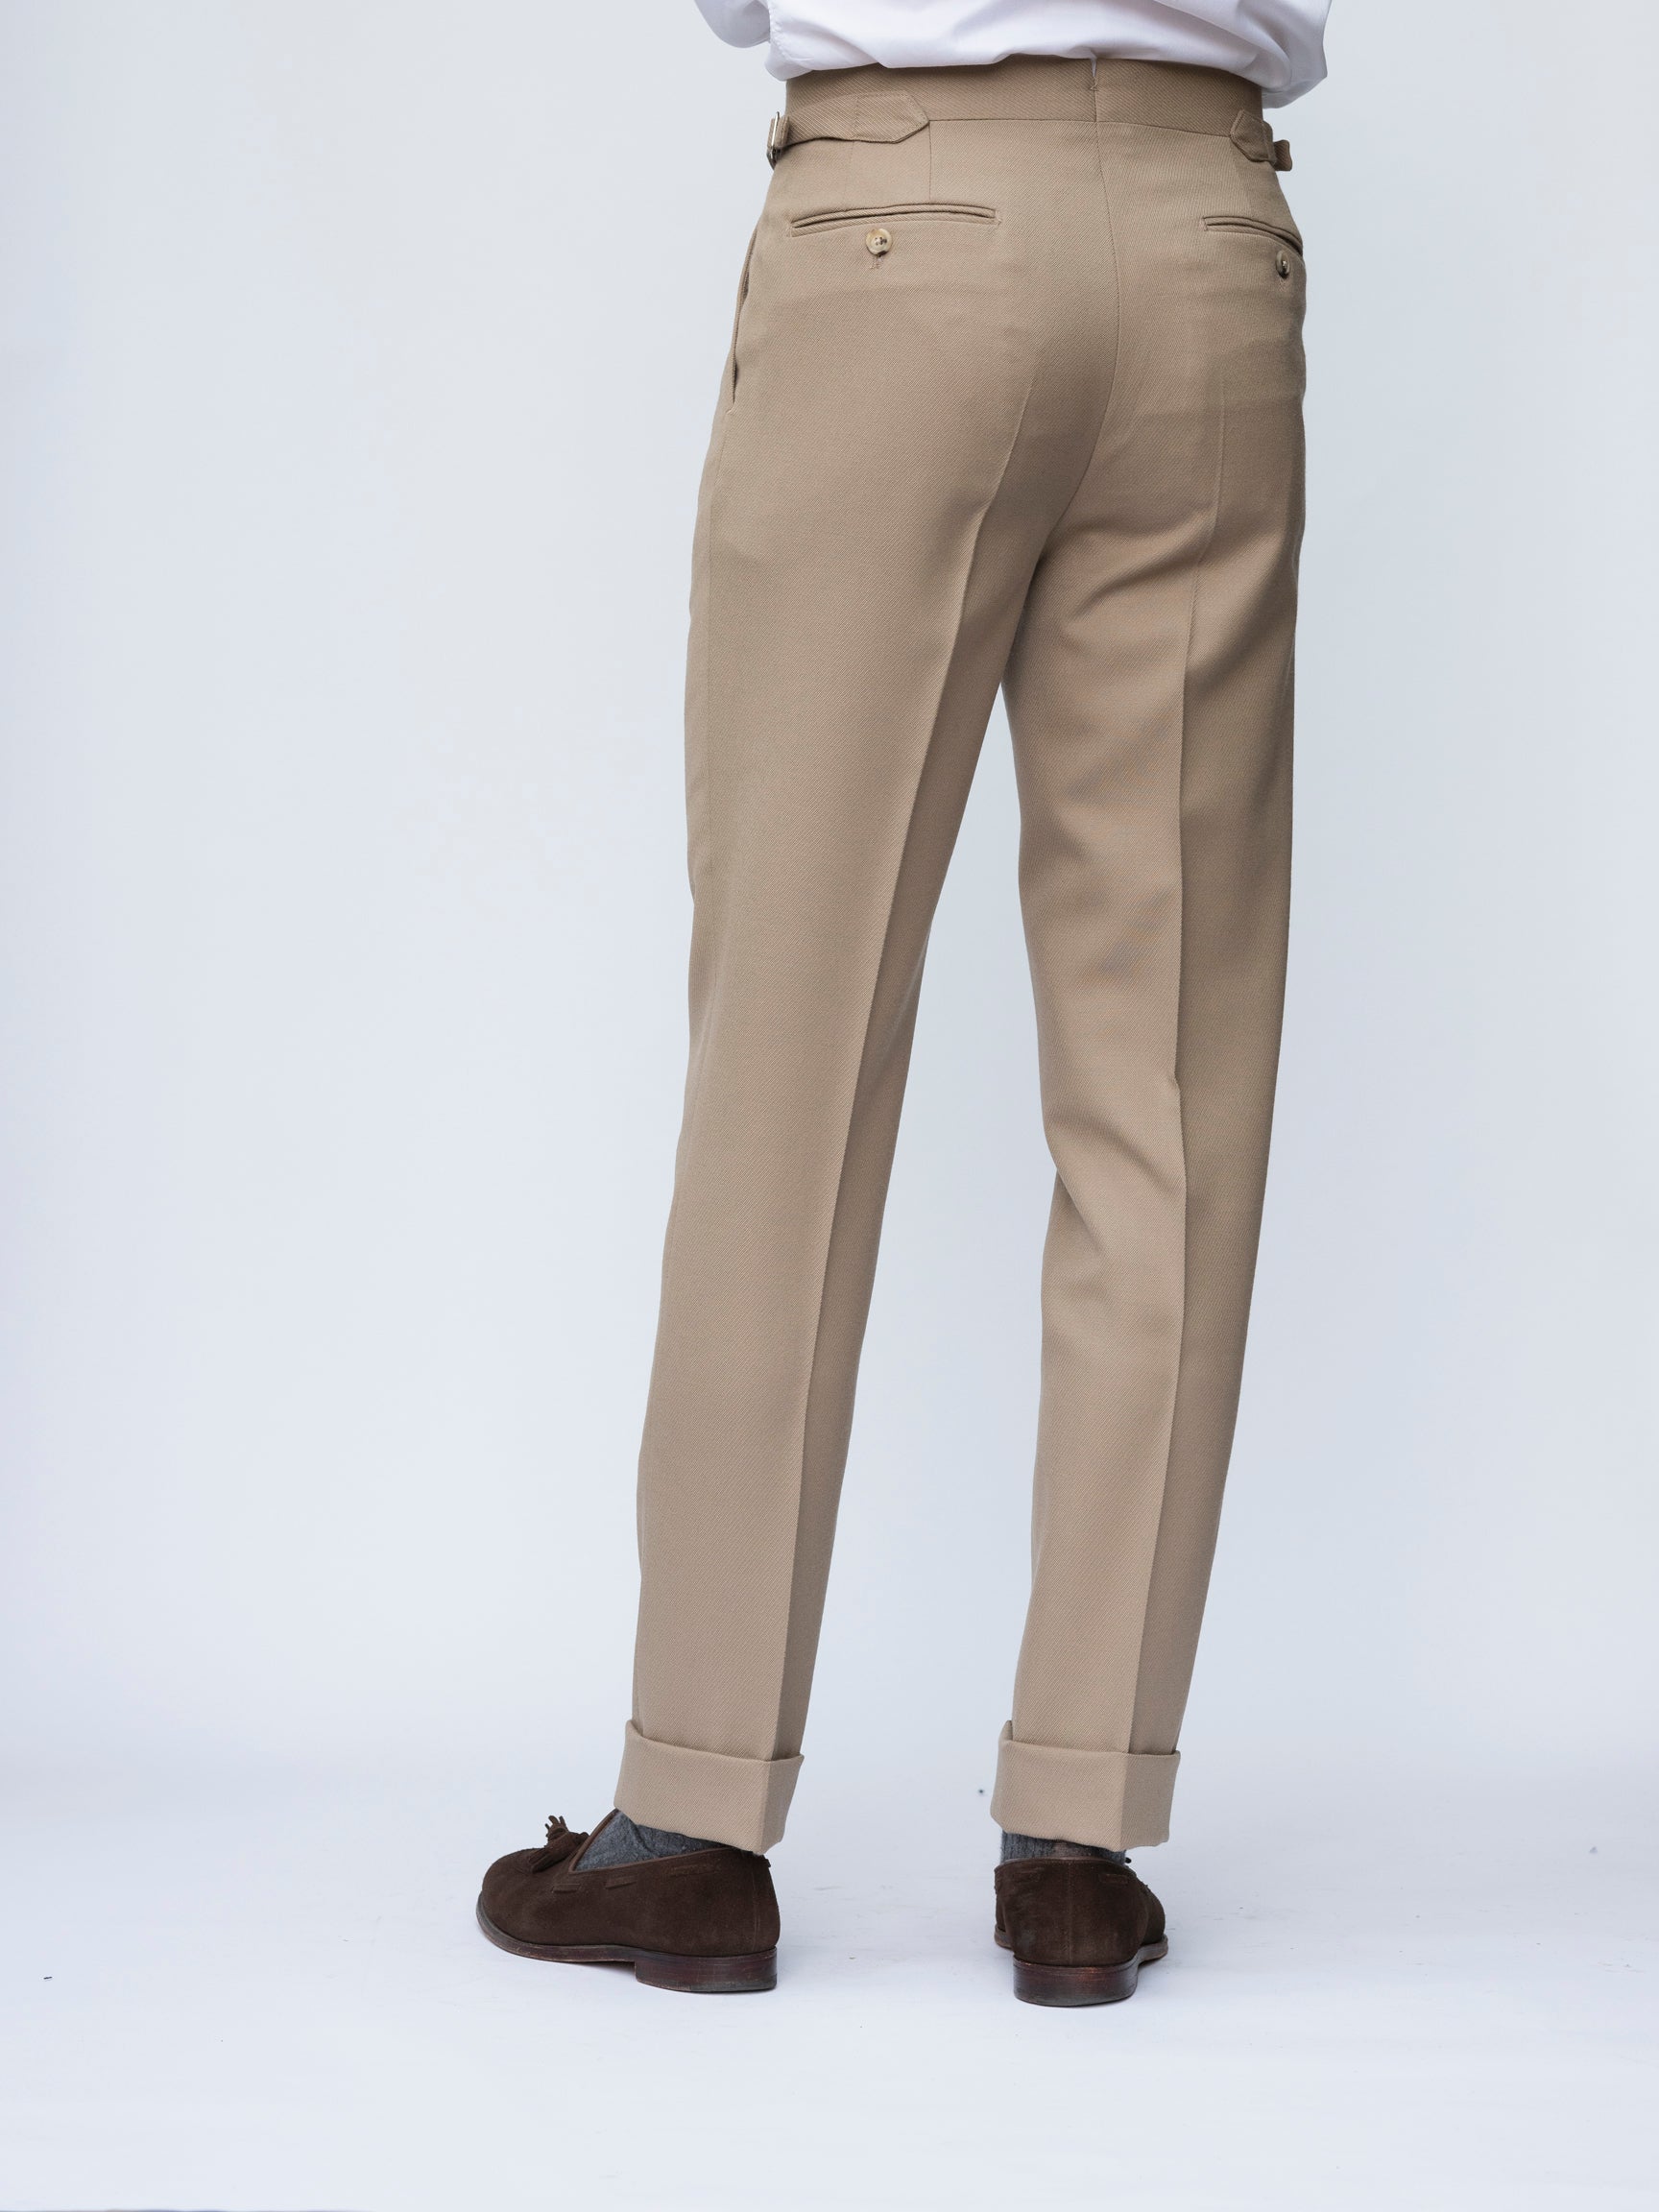 Buy Linen Club Solid Casual Mid-Rise Trouser for Men online